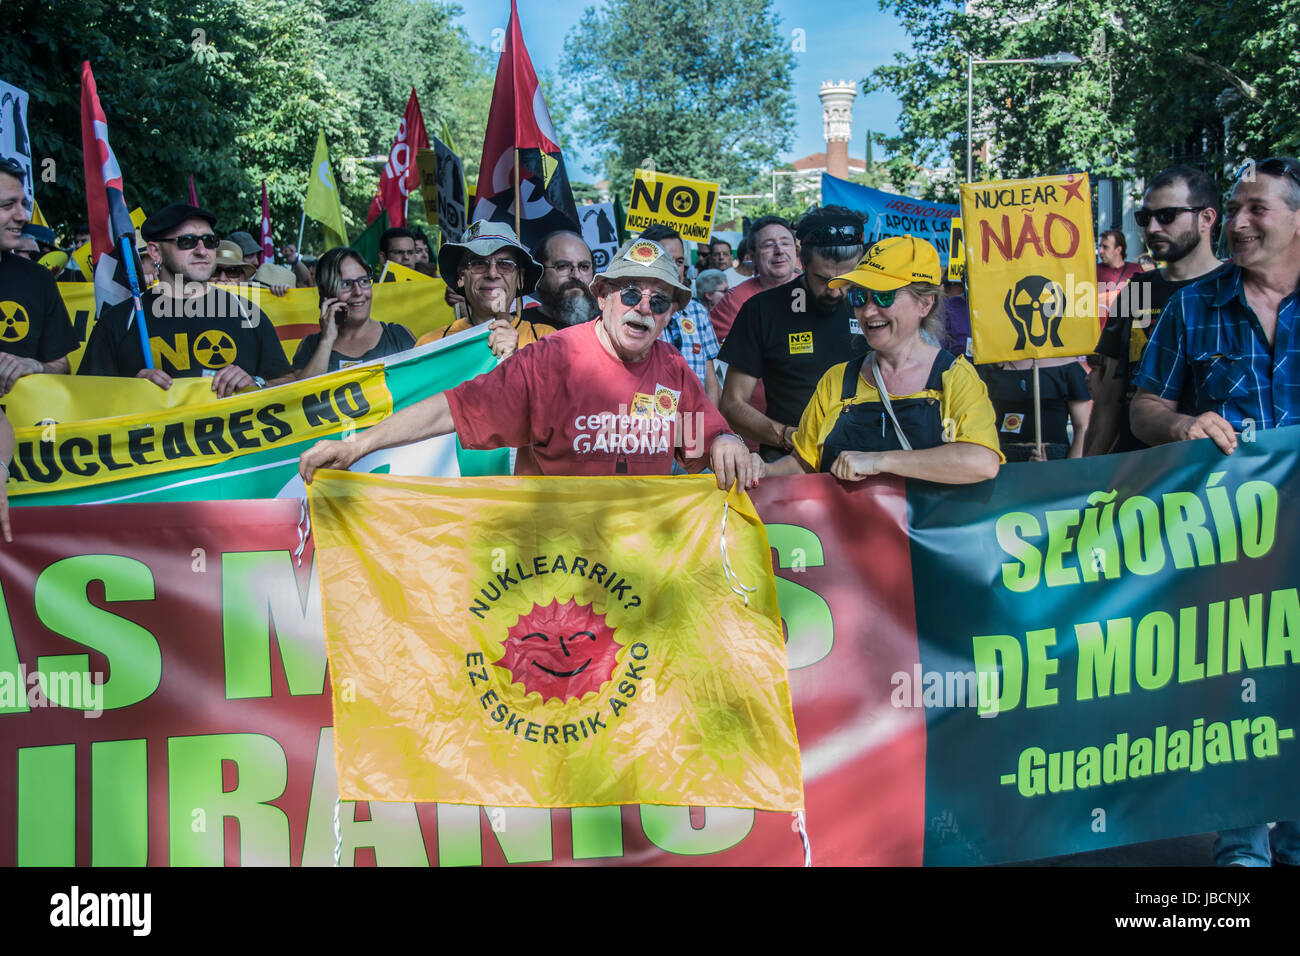 Madrid, Spain. 10th June, 2017. Demonstration agaisnt nuclear energy on the streets of Madrid, people form portugal and from spain demonstrates in the streets near of atocha train station Credit: Alberto Sibaja Ramírez/Alamy Live News Stock Photo